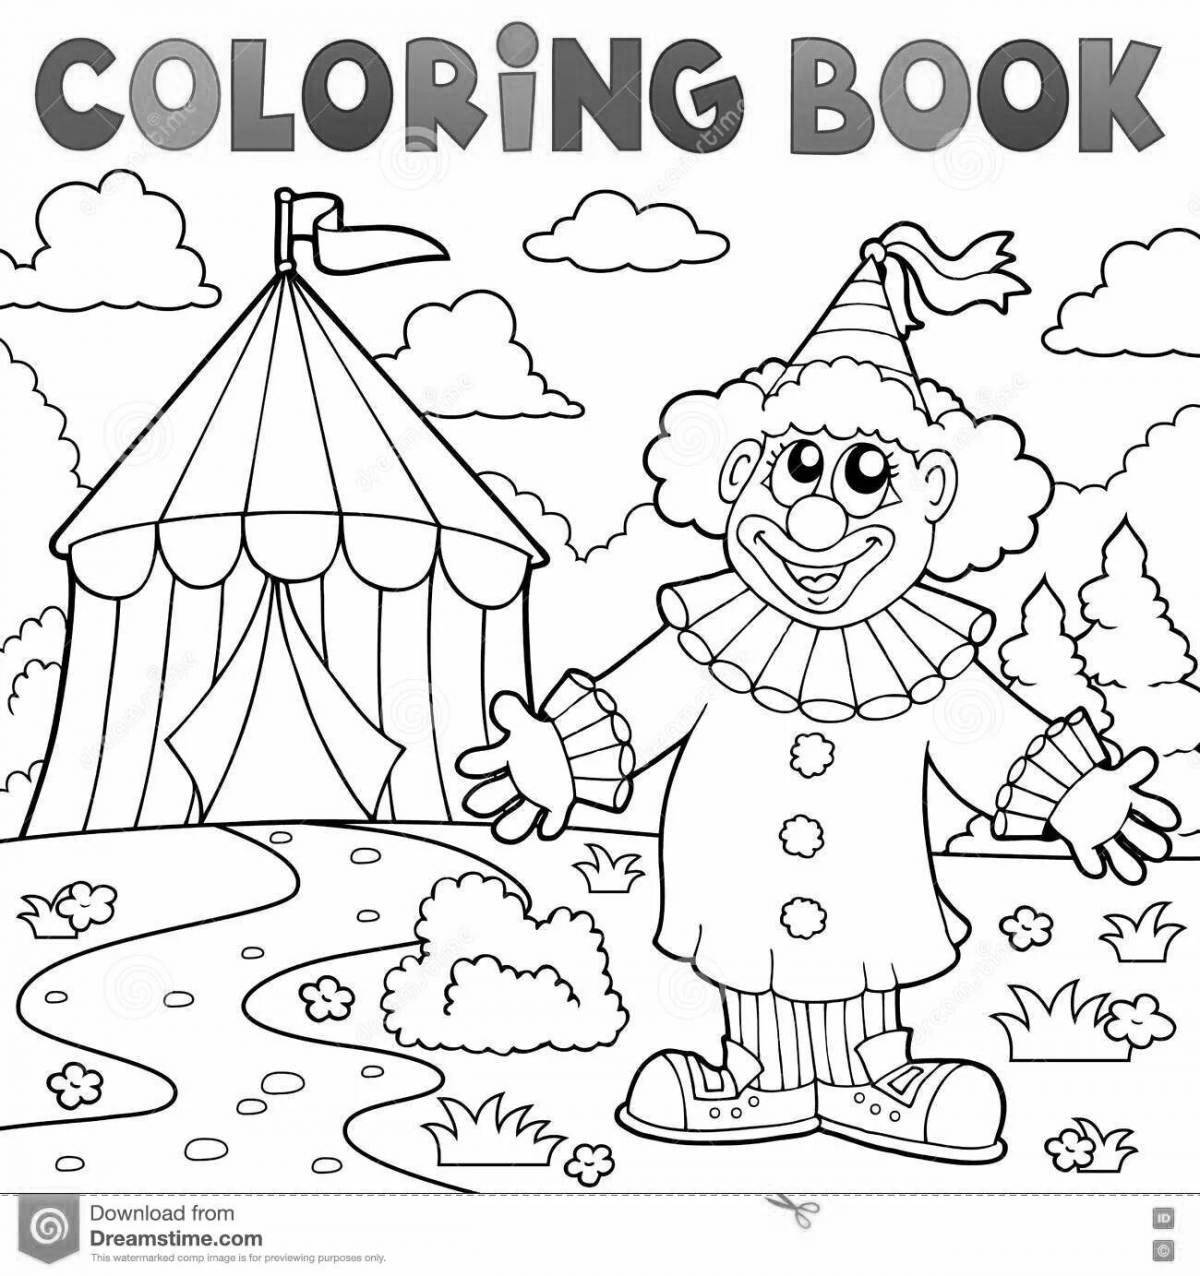 Sweet coloring at the clown's house